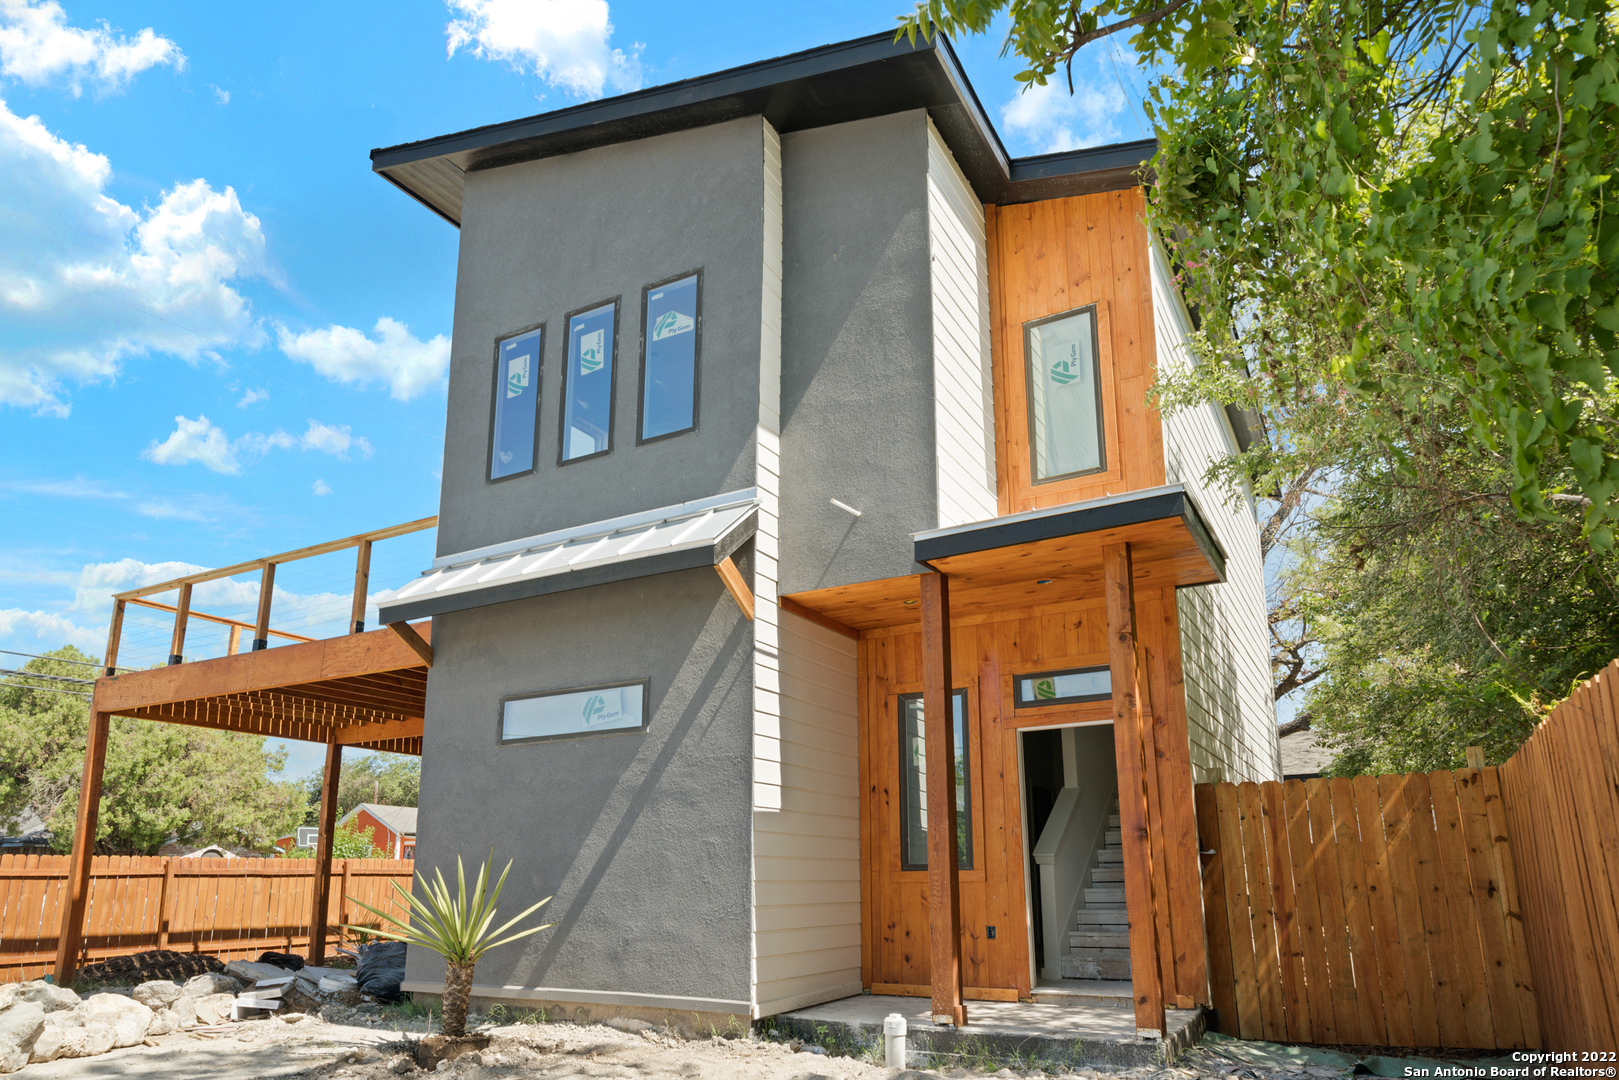 ***Under Construction: Ready until 8/15 - 9/15 - Pictures from Builder finishes on another house with different floorplan. Colors & cabinet/tile selections will vary. IMPORTANT: To see builder finishes schedule to see 510 Virginia Blvd. [MLS# 1621536]*** Location Location Location. Contemporary living in downtown San Antonio. Modern living with master bedroom and secondary bedroom with walk in closet. Large utility room with lots of shelving for storage & sink. Small office for privacy meetings with window for natural light & quartz countertops. Upstairs living area with open concept perfect for entertaining and access to large balcony with downtown views & half bathroom. A must see home. Area in back for possible future pool [see renderings of other floorplan with pool].